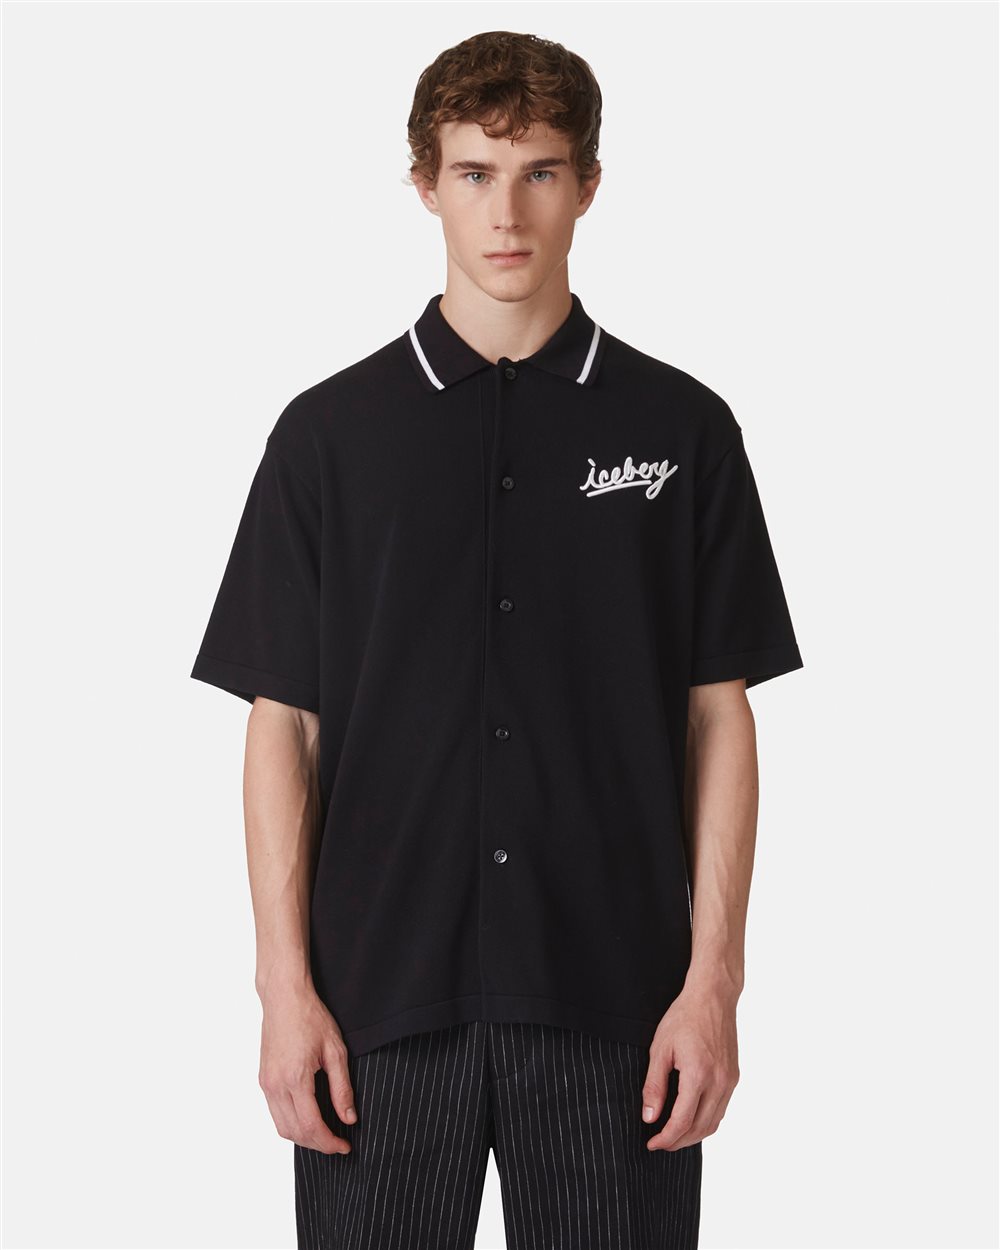 Shirt with logo - Iceberg - Official Website